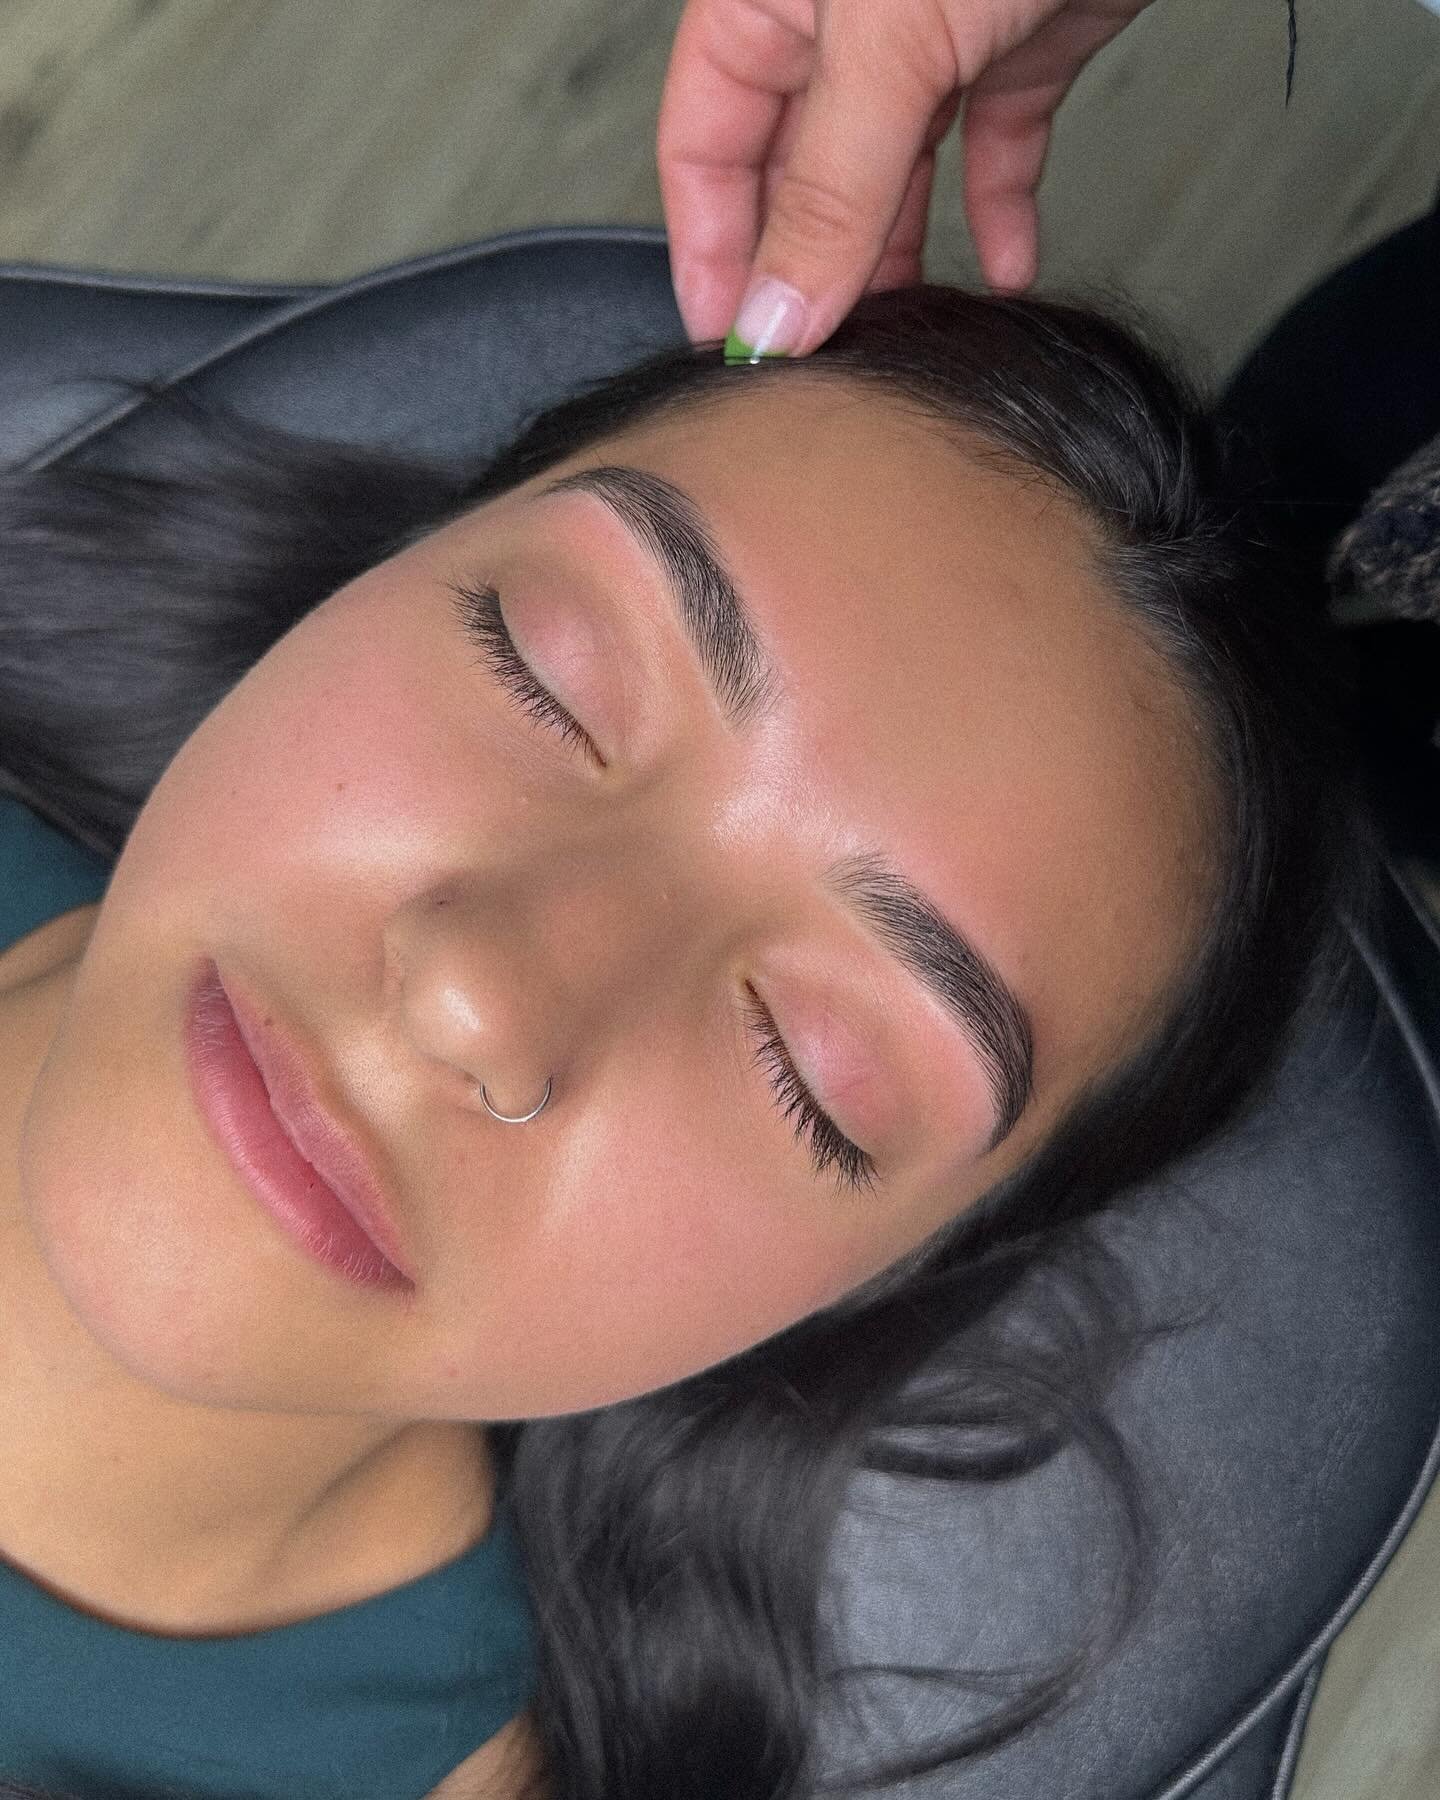 perfect brows!

brow wax only ⋆𐙚₊˚⊹ ᡣ𐭩